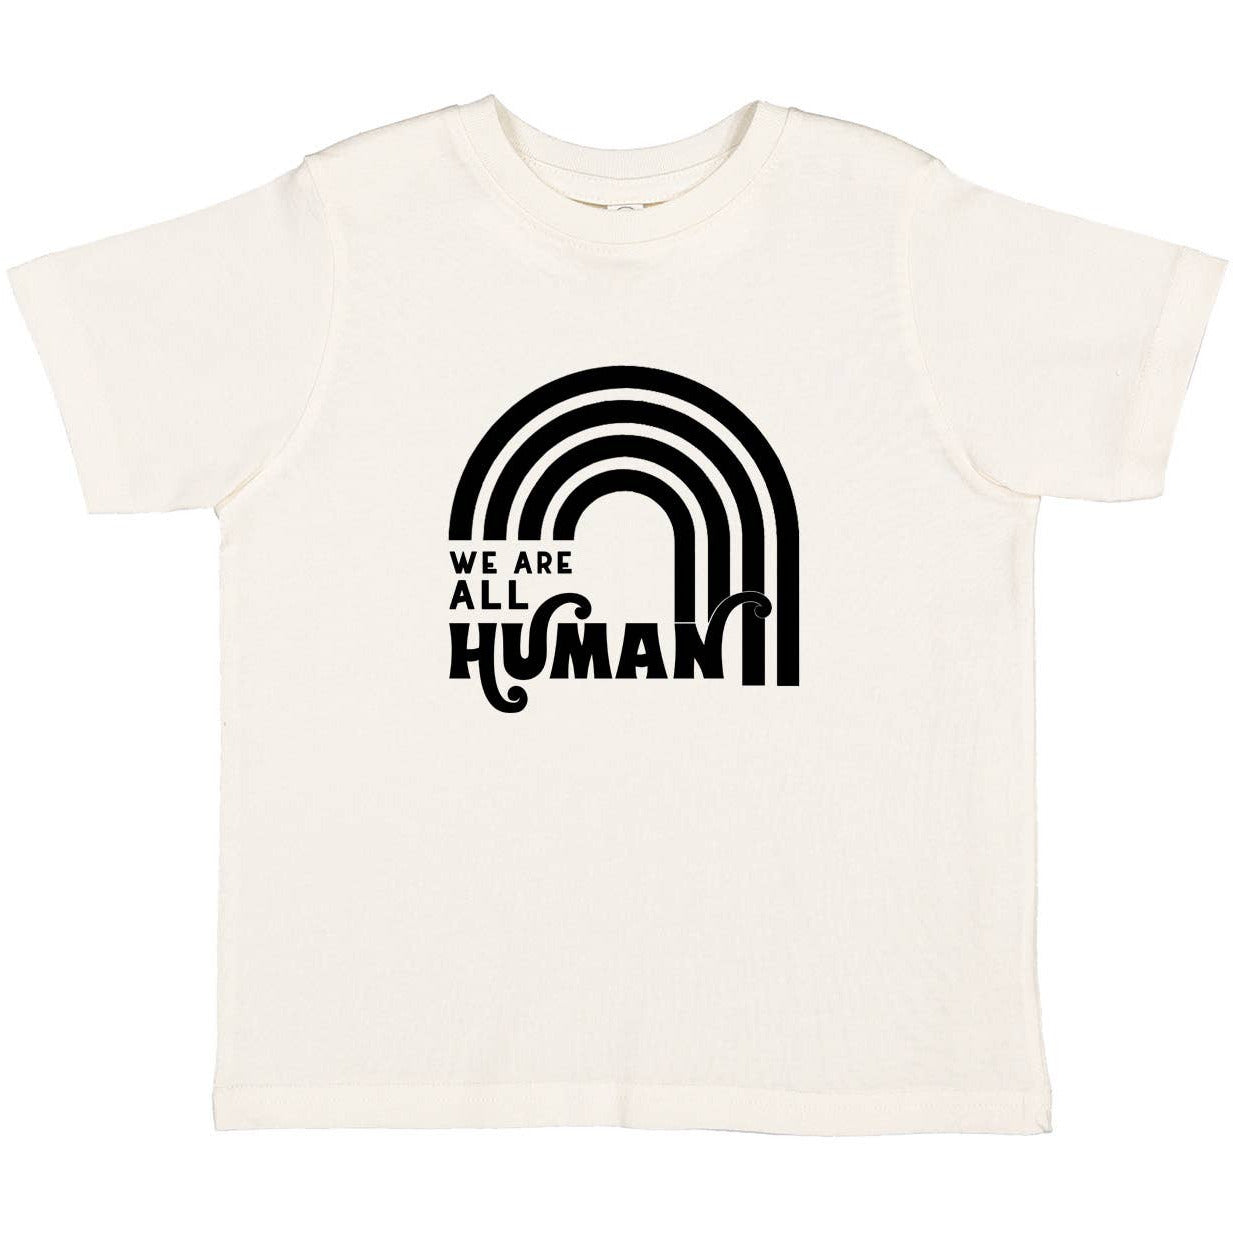 We Are All Human Tee